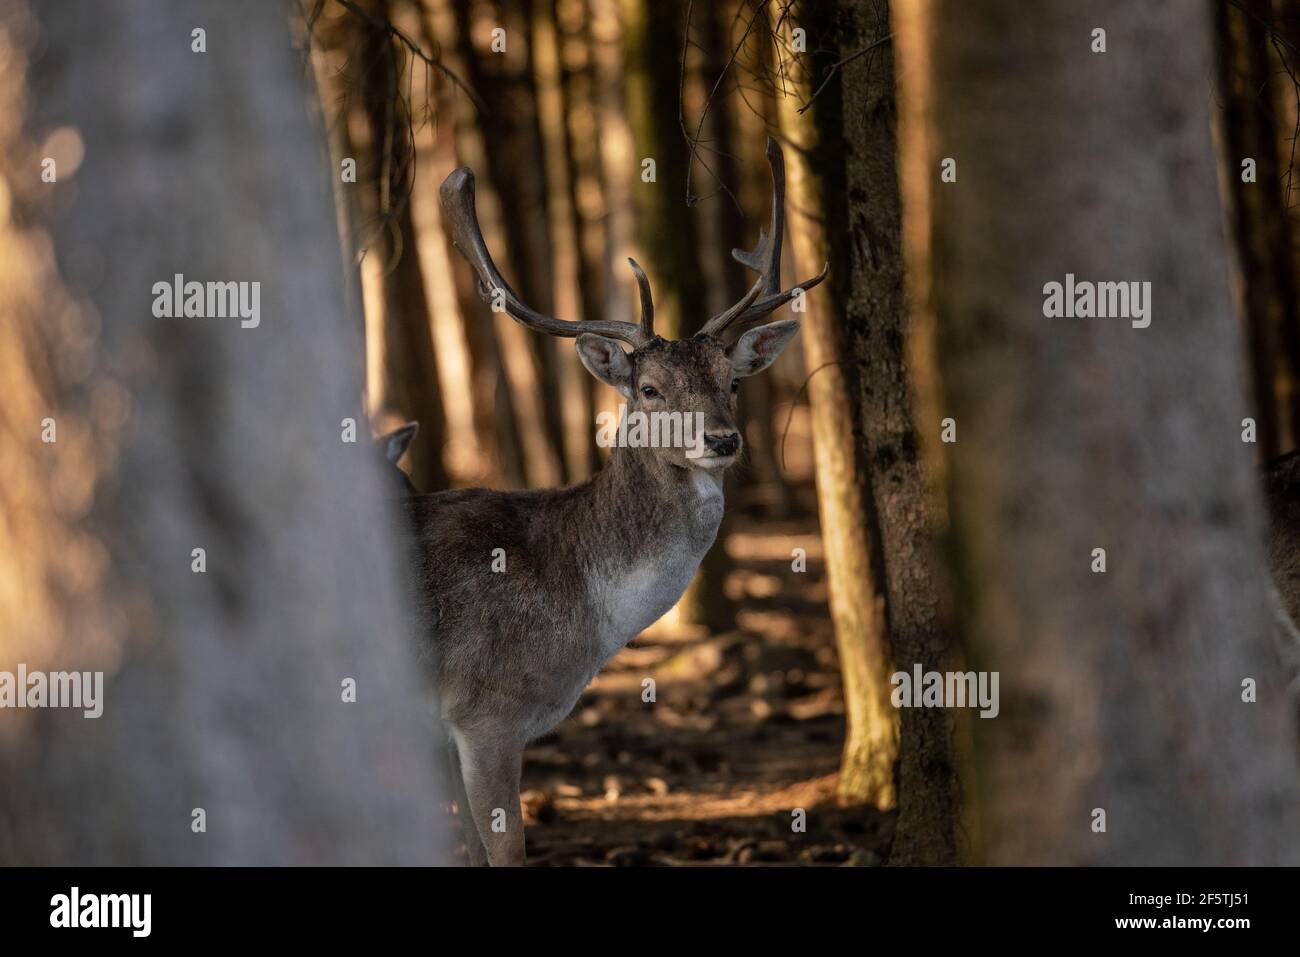 beautiful deer standing in a wild forest Stock Photo